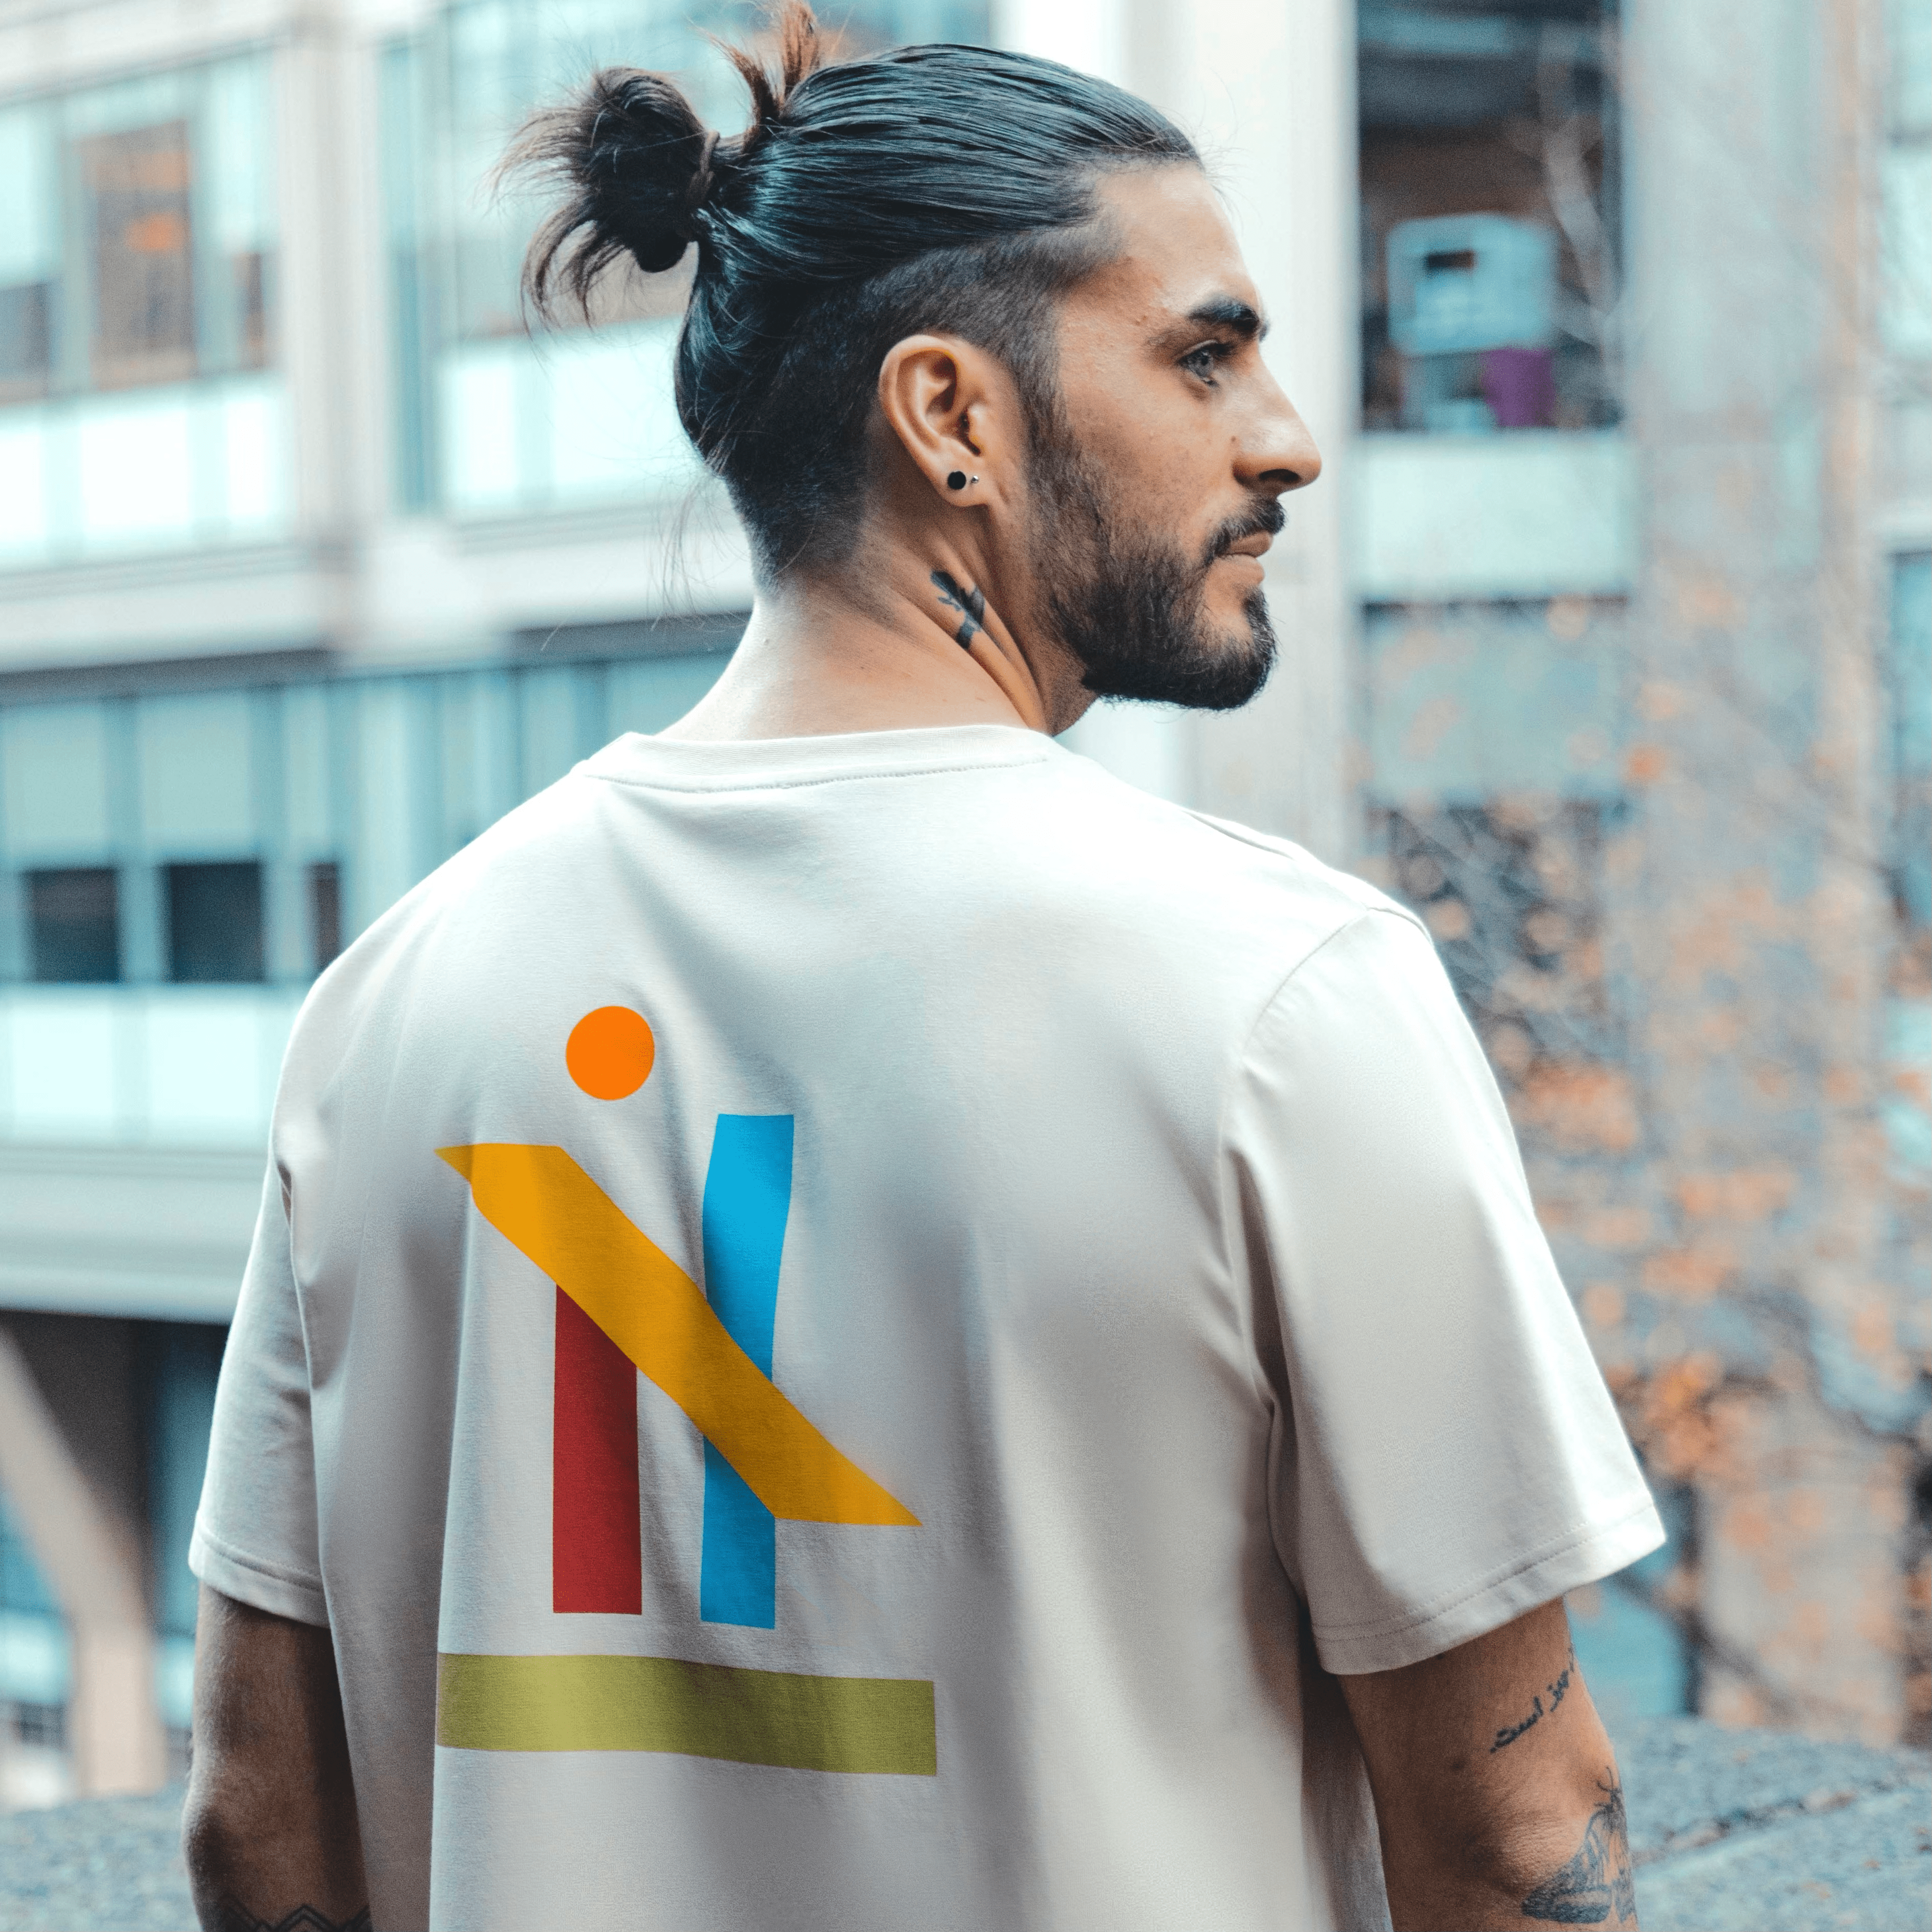 h clothing - male model with tattoos with back to camera wearing sandy tanned tshirt with graphic of colourful geometric shapes